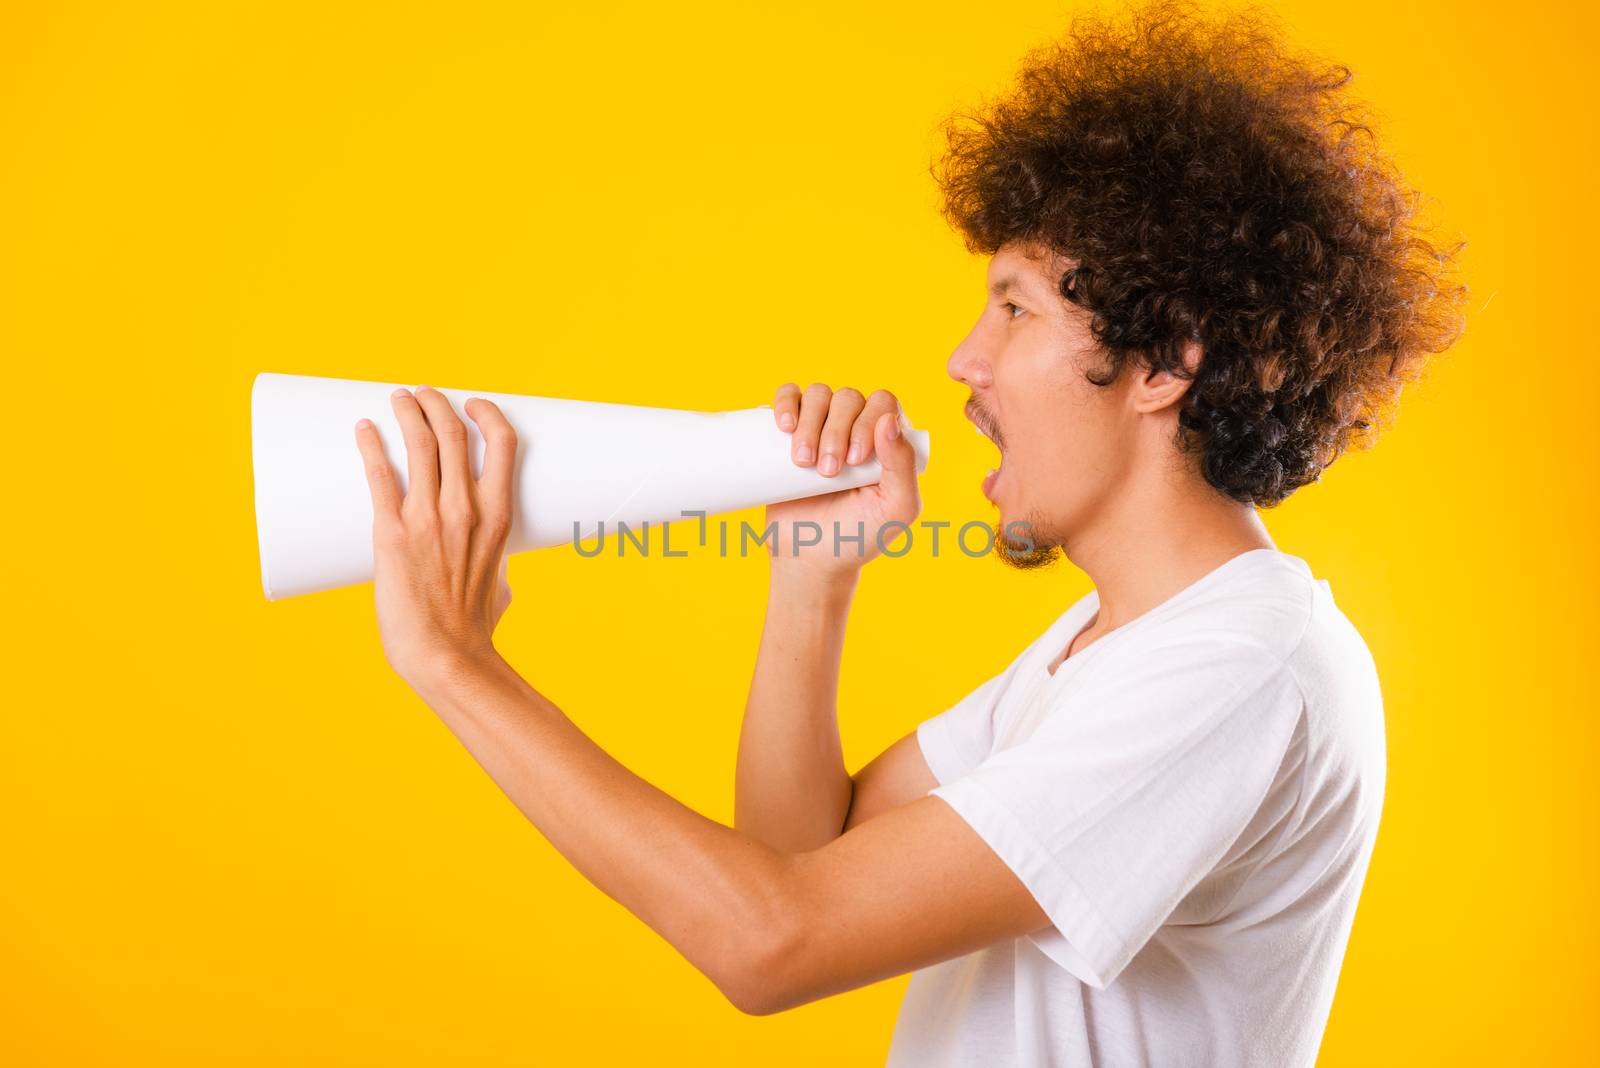 Asian handsome man with curly hair he announcing or spreading news using white speaker paper isolate on yellow background